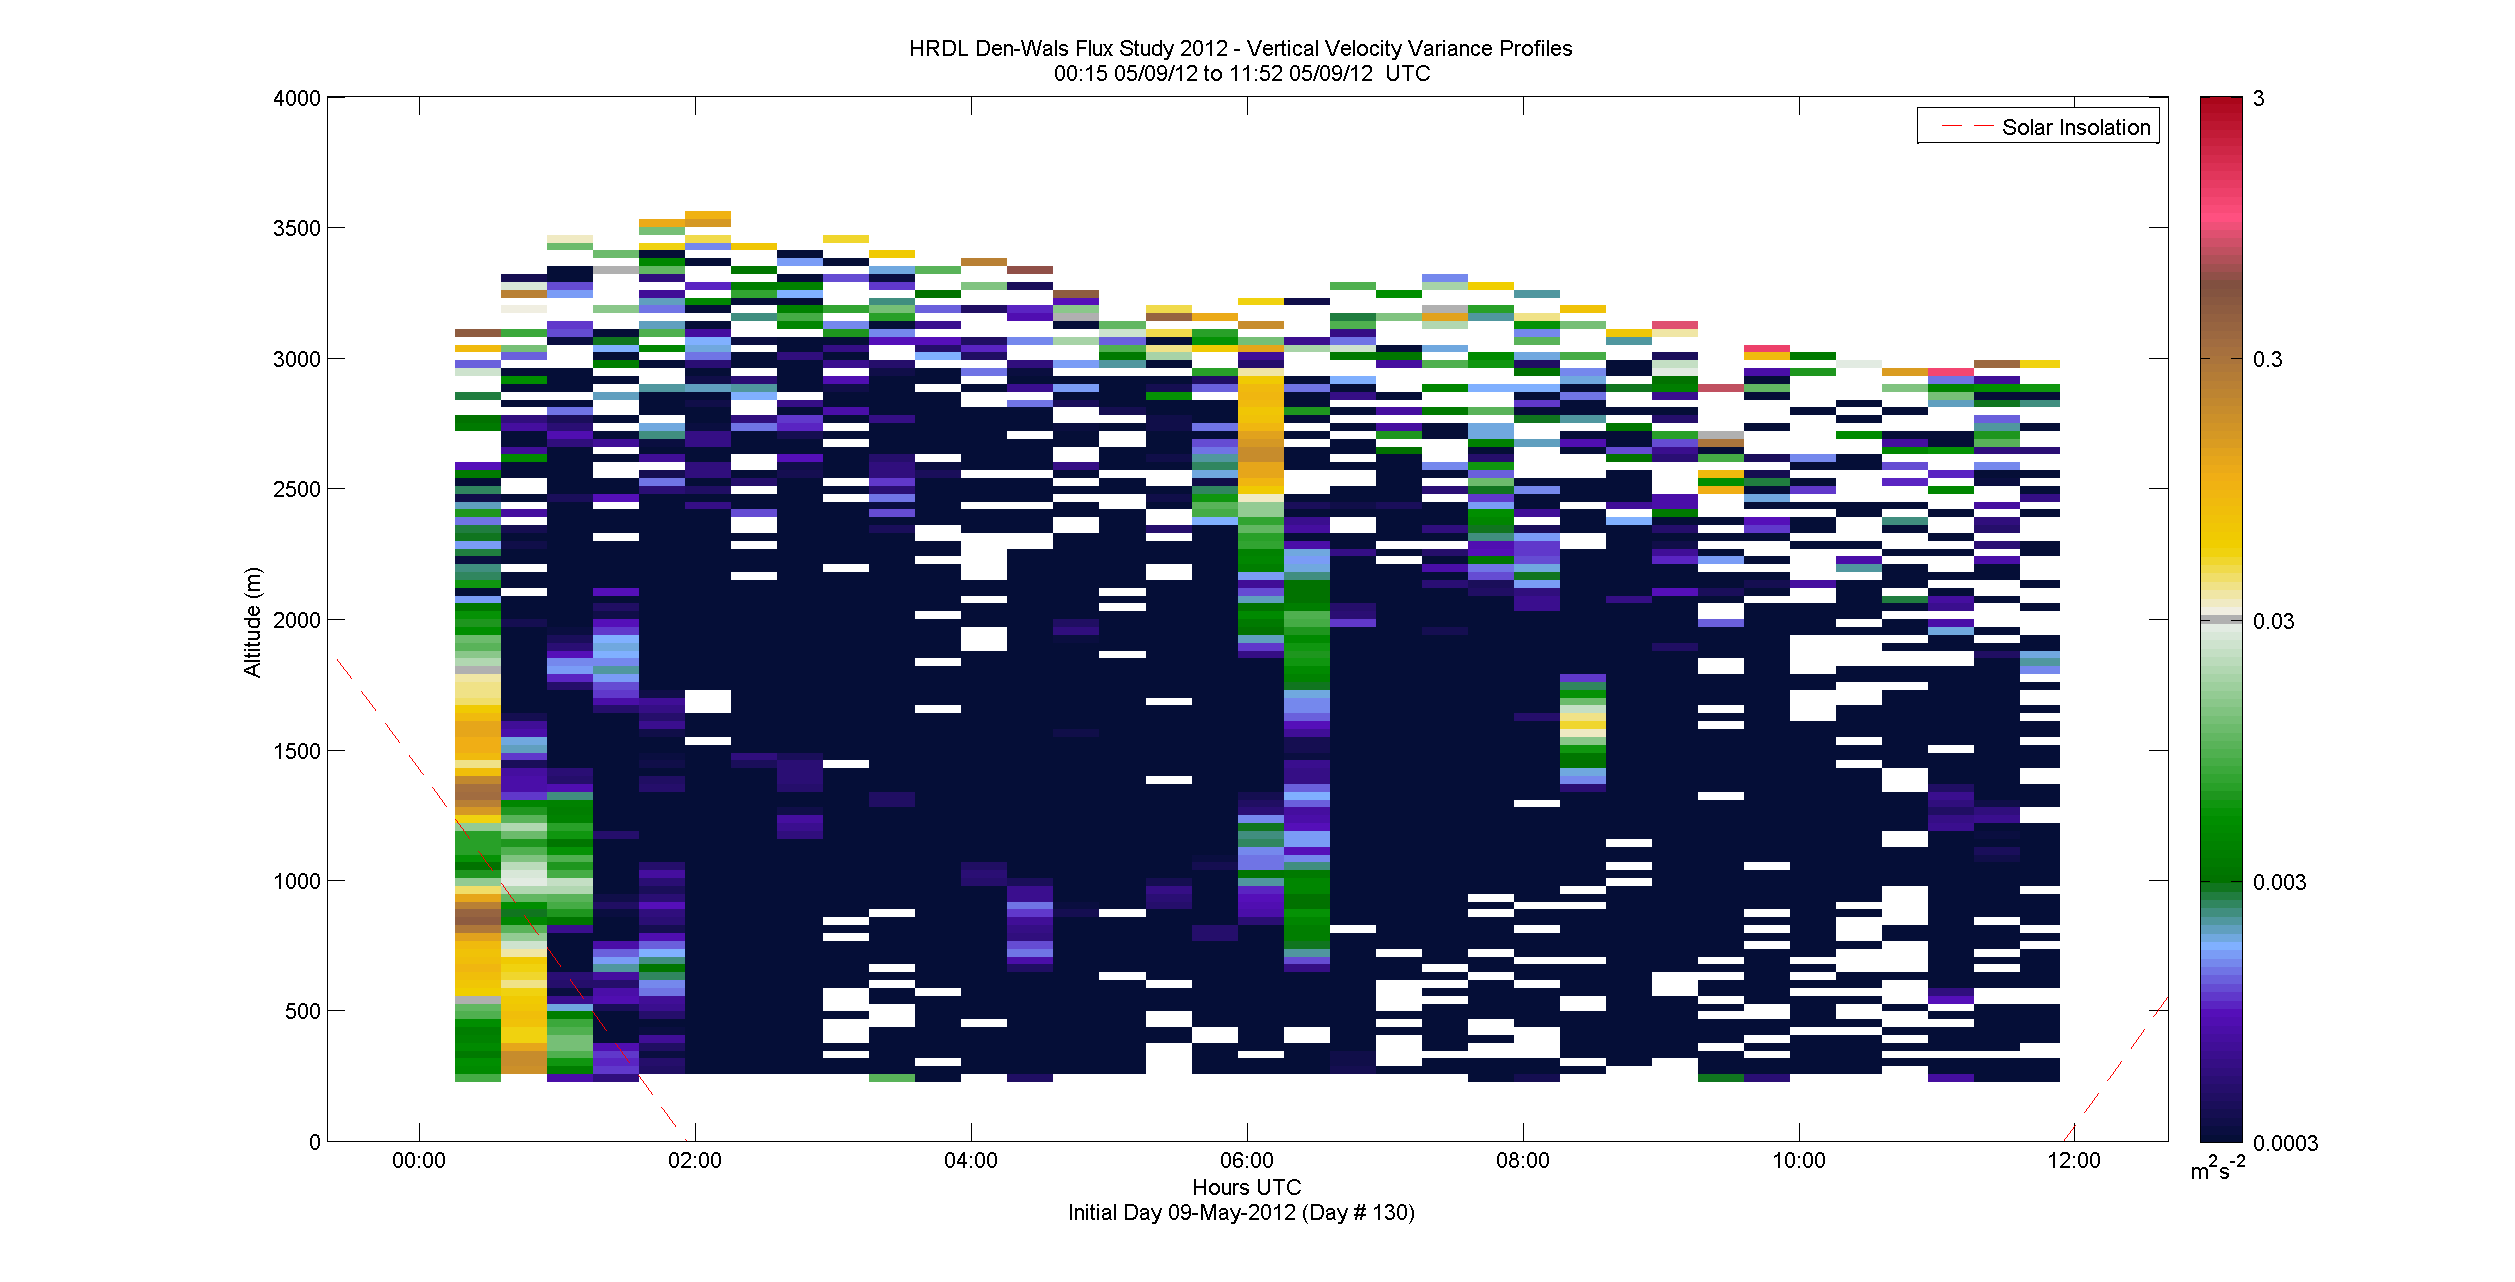 HRDL vertical variance profile - May 9 am